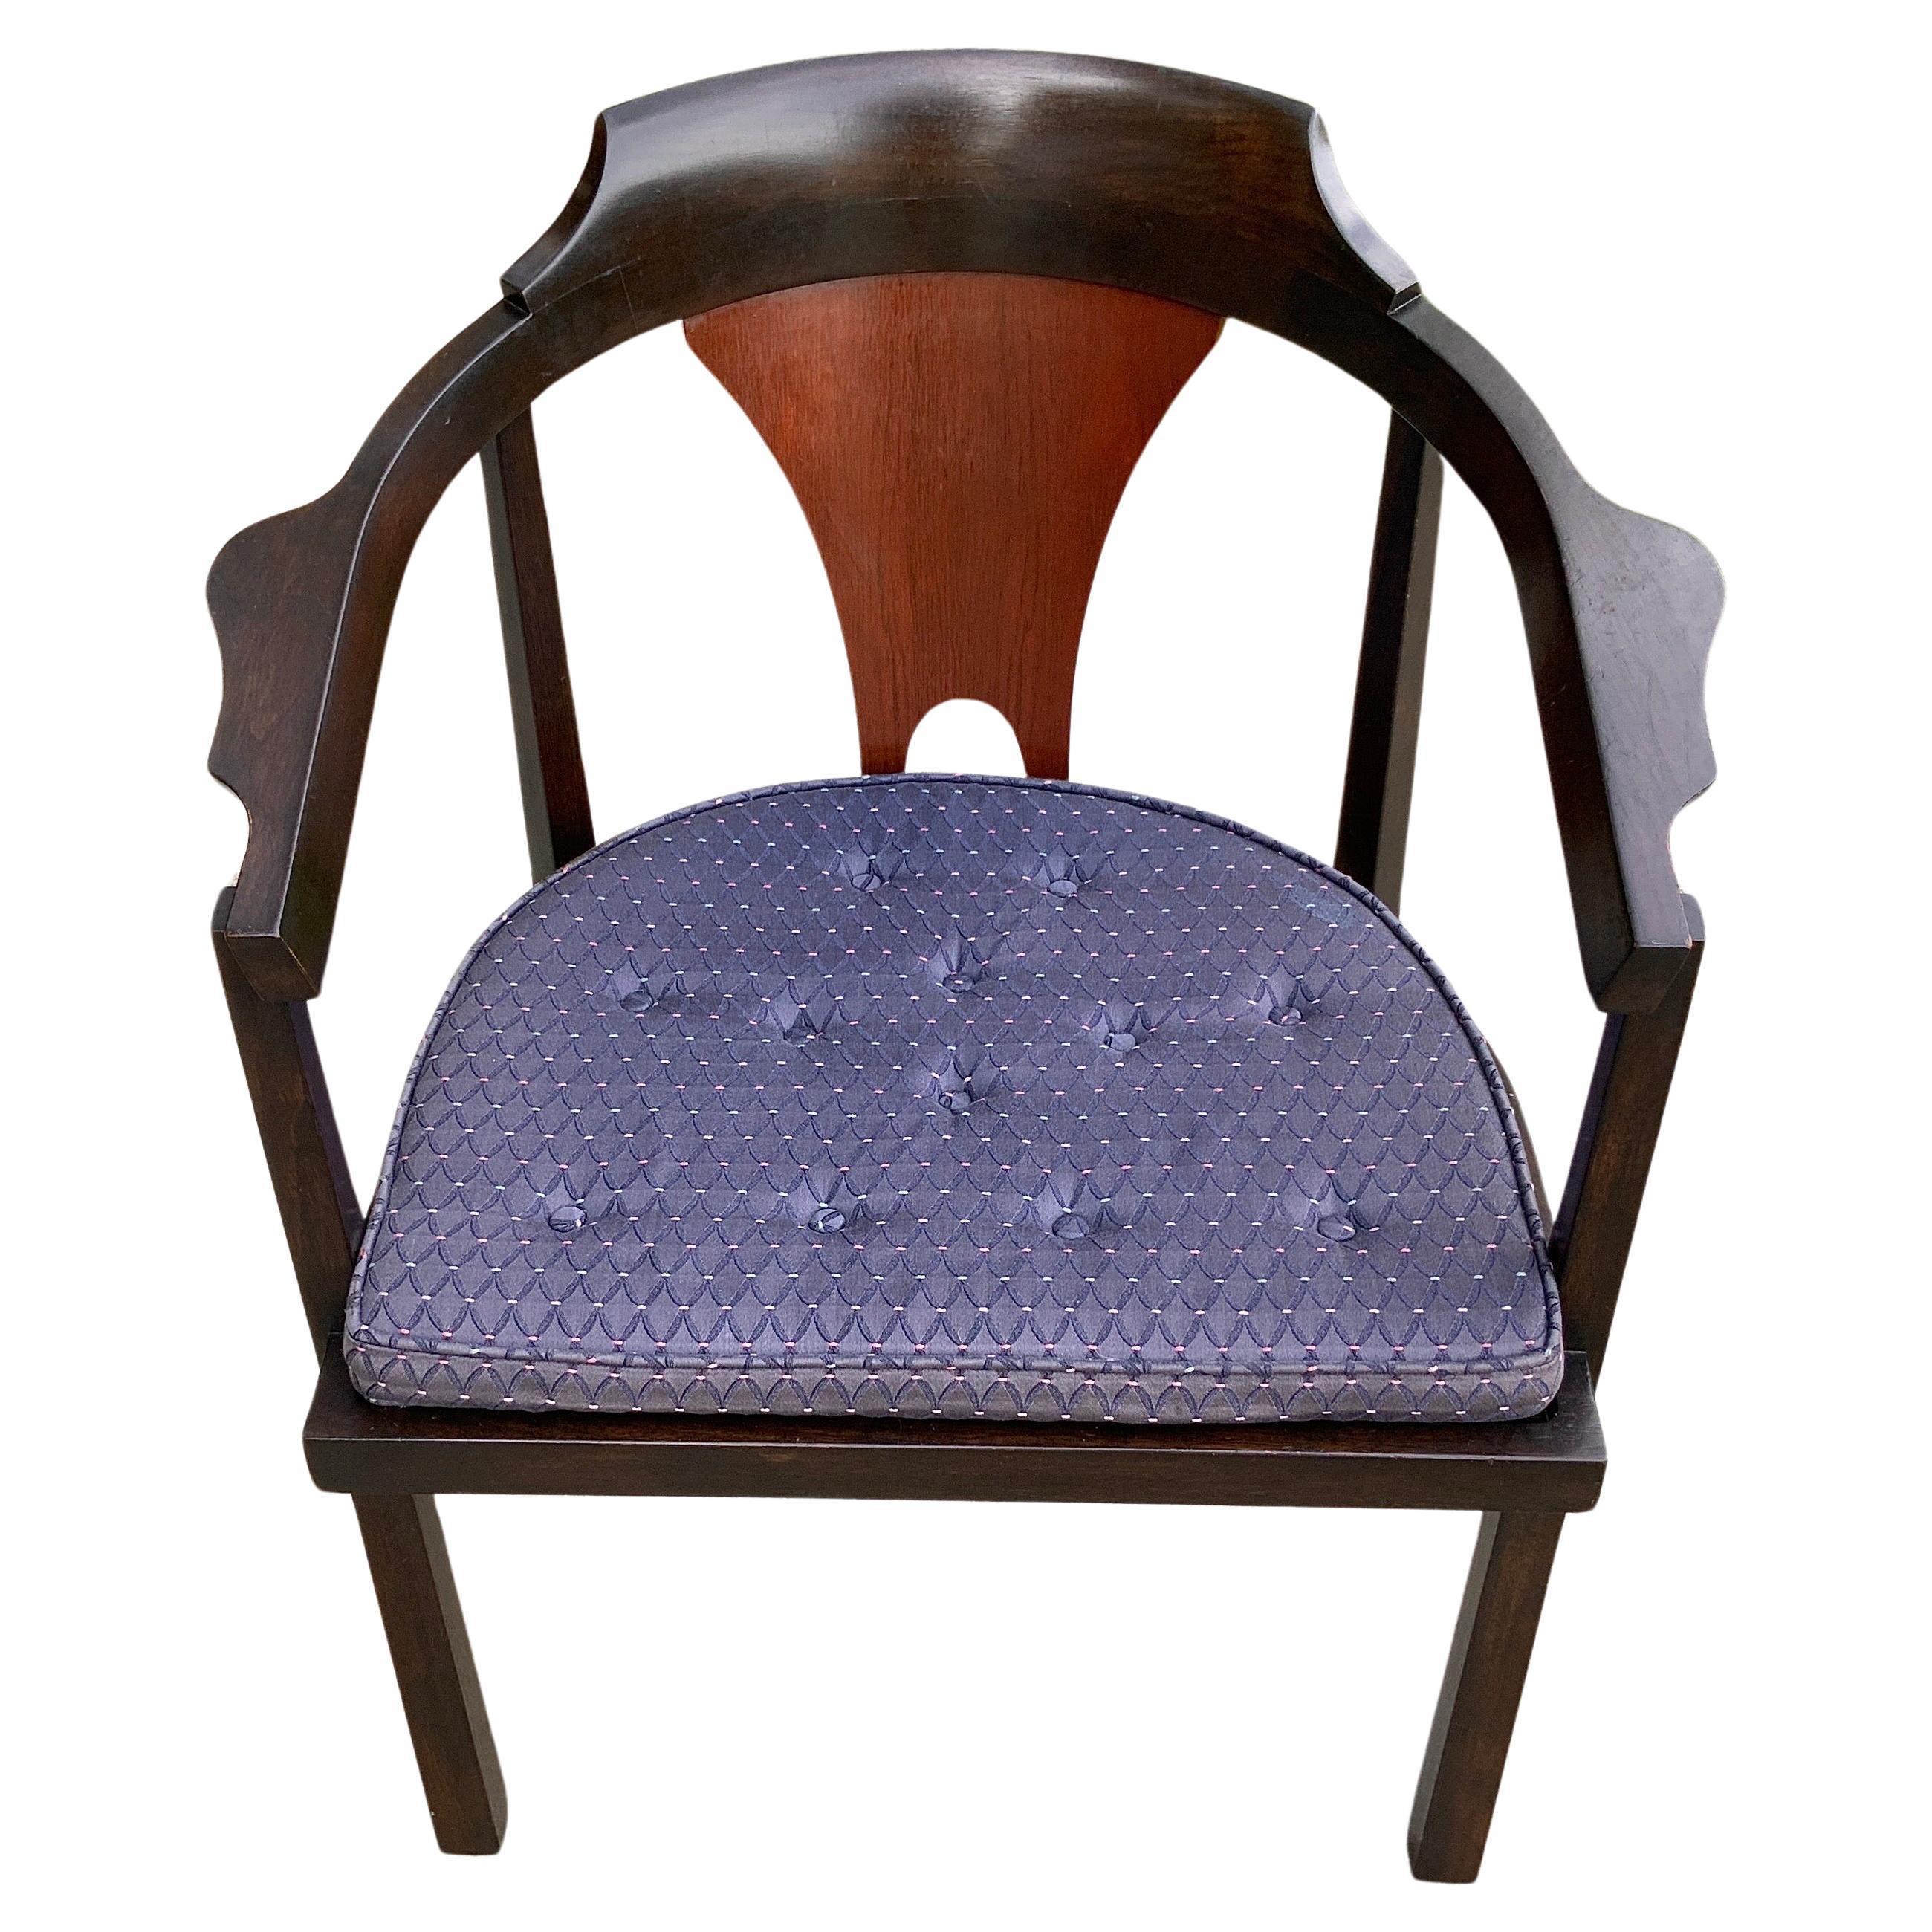 Hand-Crafted Horseshoe Chair By Edward Wormley For Dunbar, Mid-Century Modern For Sale